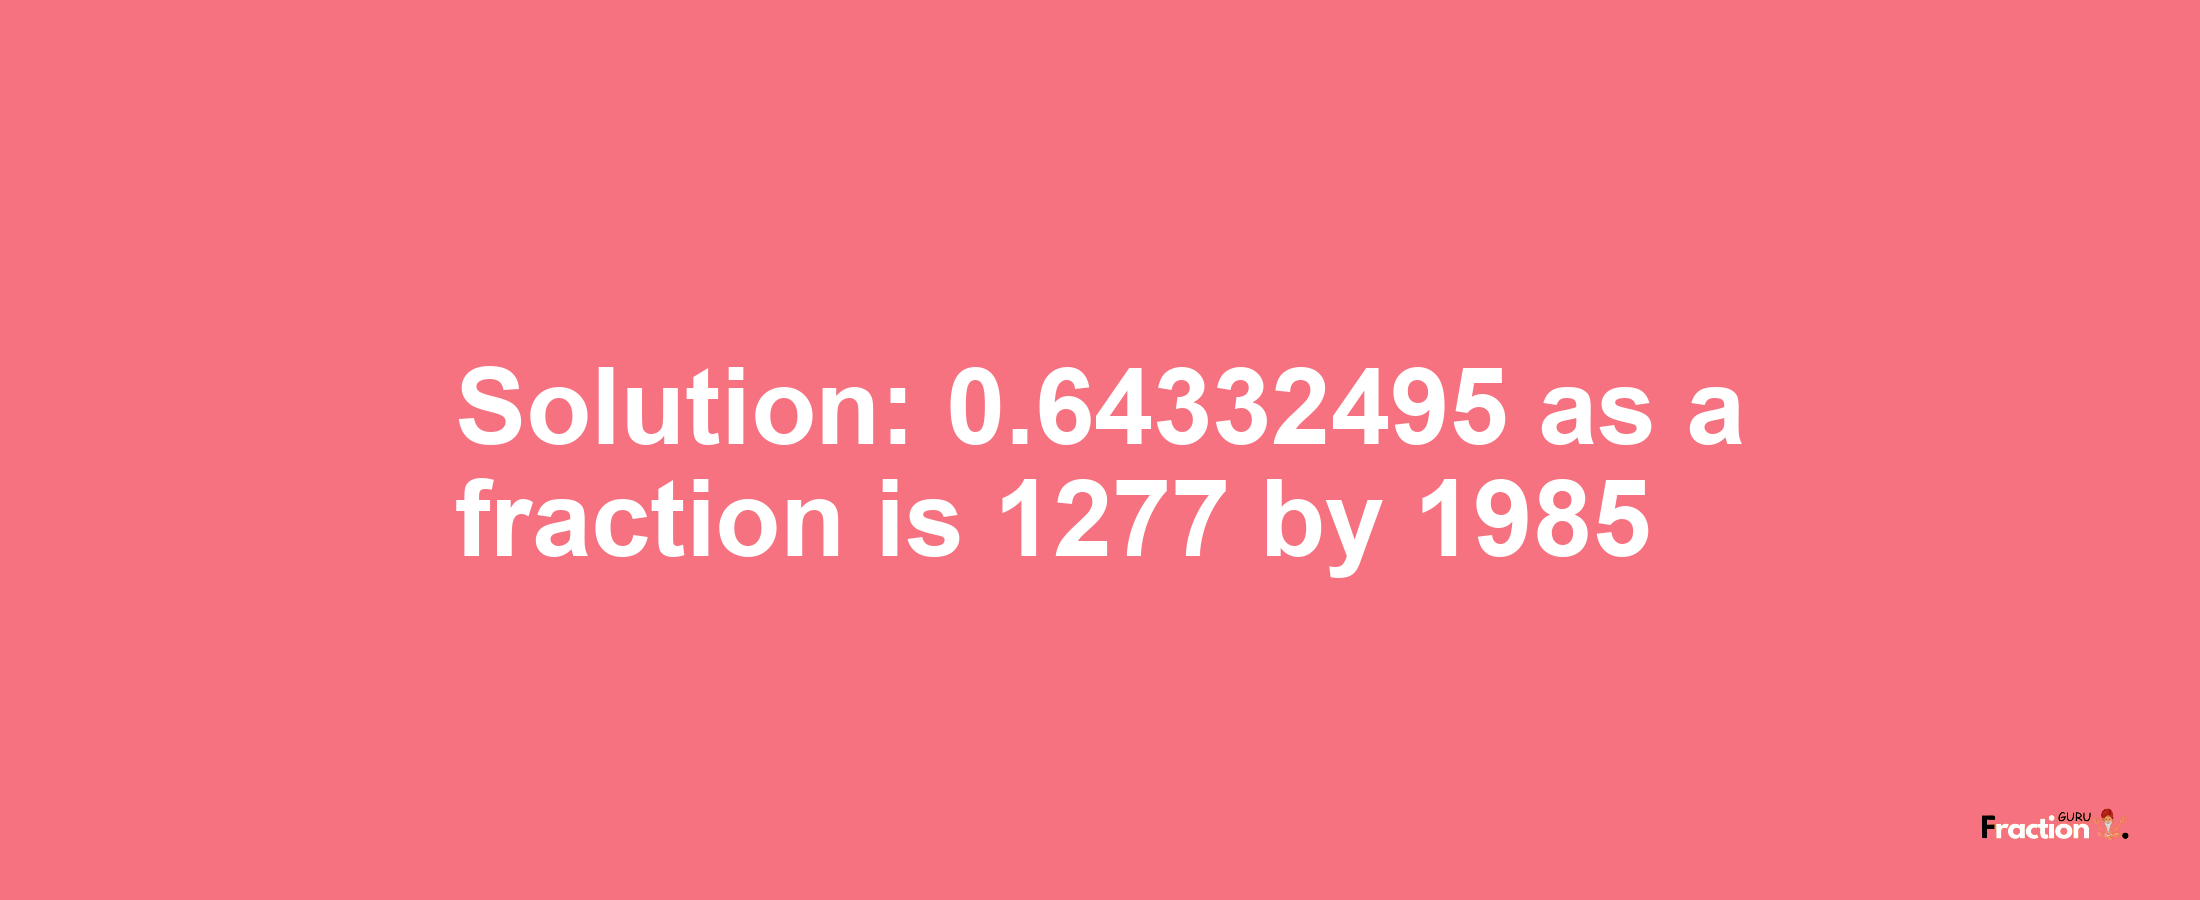 Solution:0.64332495 as a fraction is 1277/1985